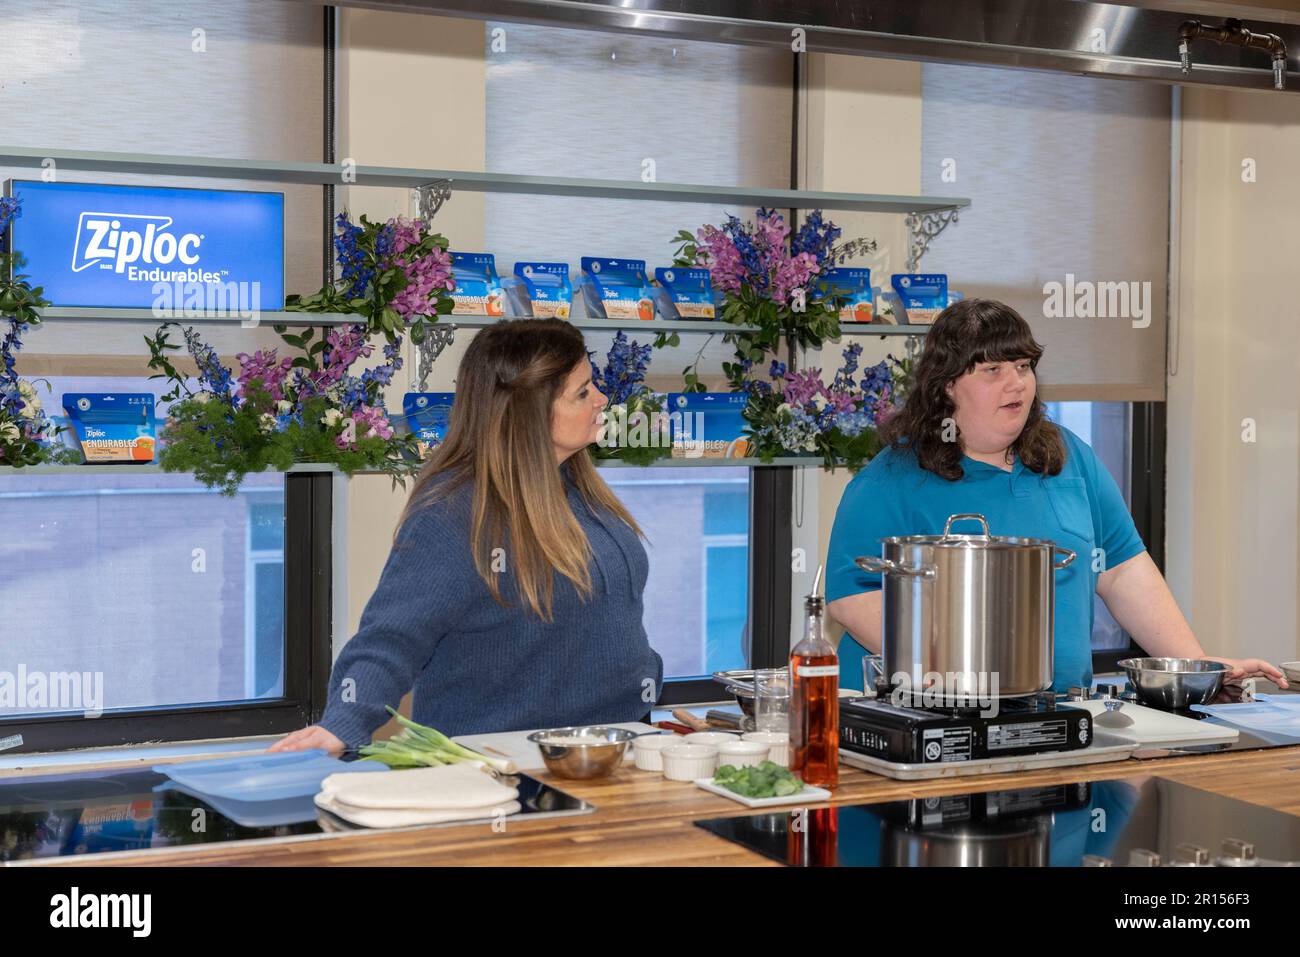 IMAGE DISTRIBUTED FOR ZIPLOC ENDURABLES - Alex Guarnaschelli uses Ziploc  Brand Endurables as she leads a cooking demonstration ahead of Mother's Day  with her daughter Ava Clark in New York, Wednesday, May